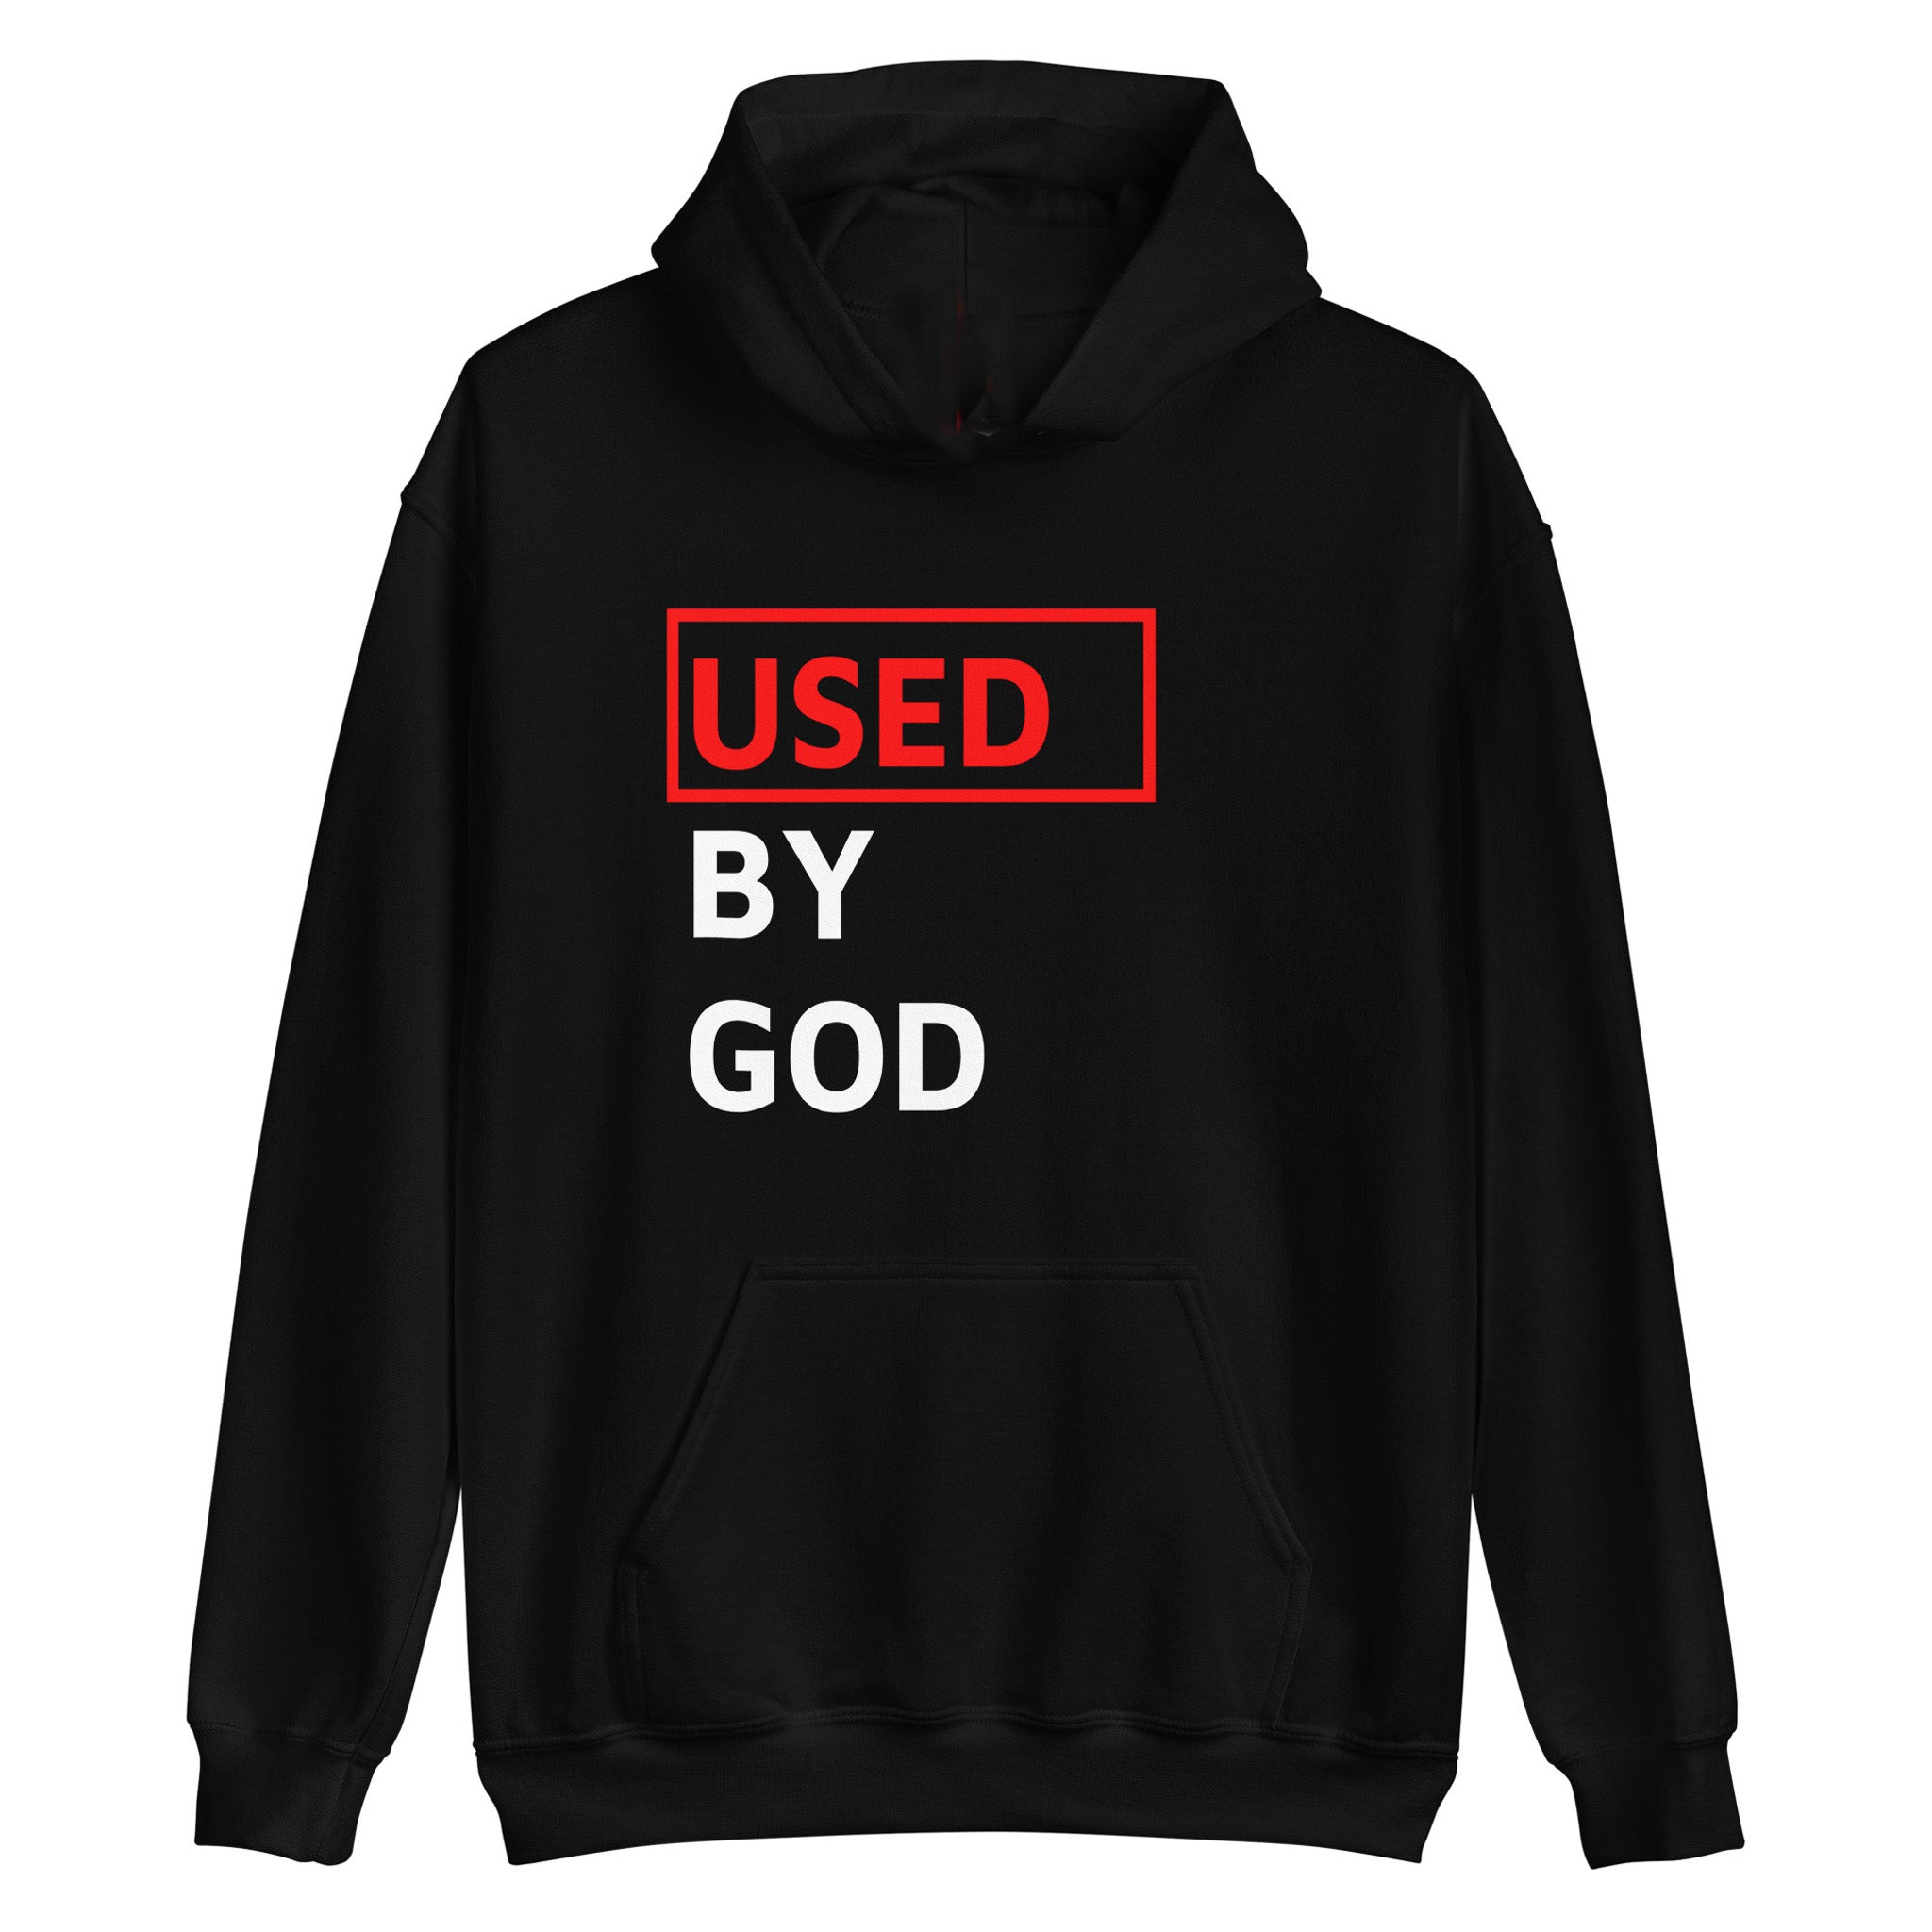 The Blueprint Hoodie, Used By God, Used By God Clothing, Christian Apparel, Christian Hoodies, Christian Clothing, Christian Shirts, God Shirts, Christian Sweatshirts, God Clothing, Jesus Hoodie, christian clothing t shirts, Jesus Clothes, t-shirts about jesus, hoodies near me, Christian Tshirts, God Is Dope, Art Of Homage, Red Letter Clothing, Elevated Faith, Active Faith Sports, Beacon Threads, God The Father Apparel